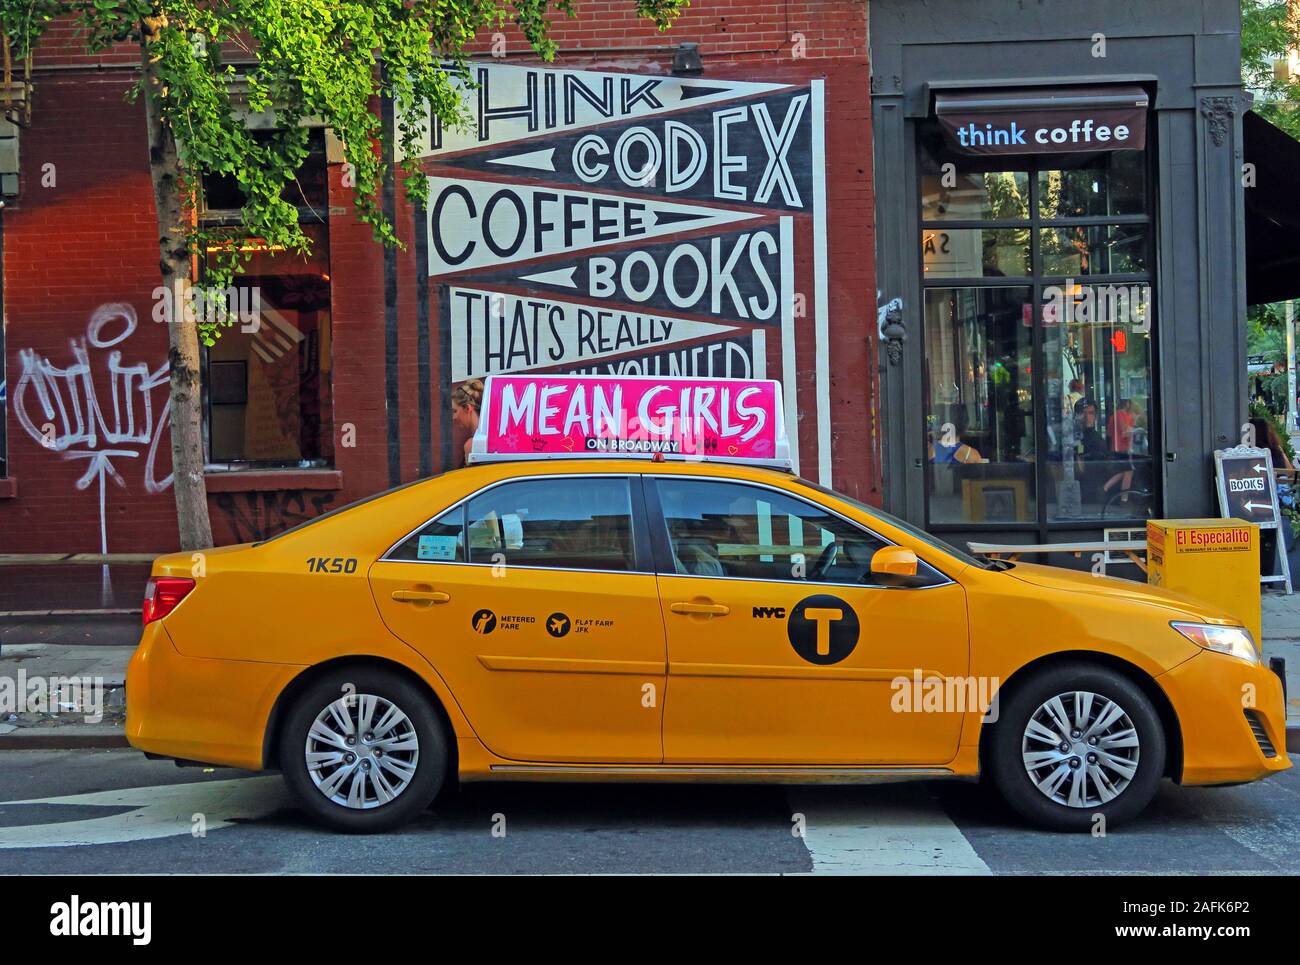 NYC Yellow CAB,1K50,Think Coffee,Think,Codex,Coffee,Books,Mean Girls,taxi Driver, Manhattan,New York,New York City, NY,State,United States,USA Banque D'Images